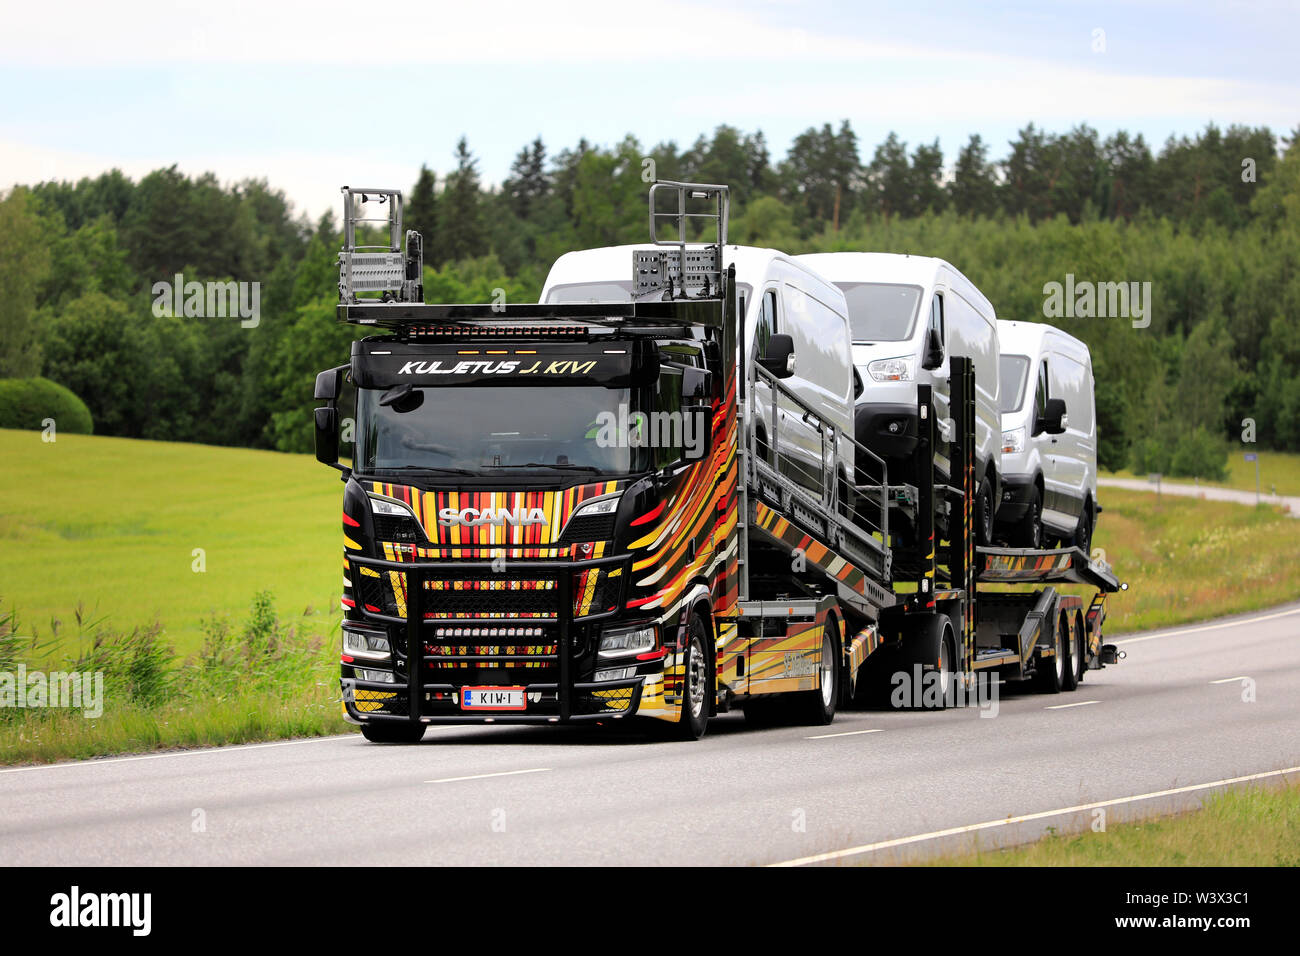 Salo, Finland - June 29, 2019: Unique vehicle carrier Scania R650 of Kuljetus J. Kivi hauls Ford transit vans on highway 52 on a day of summer. Stock Photo